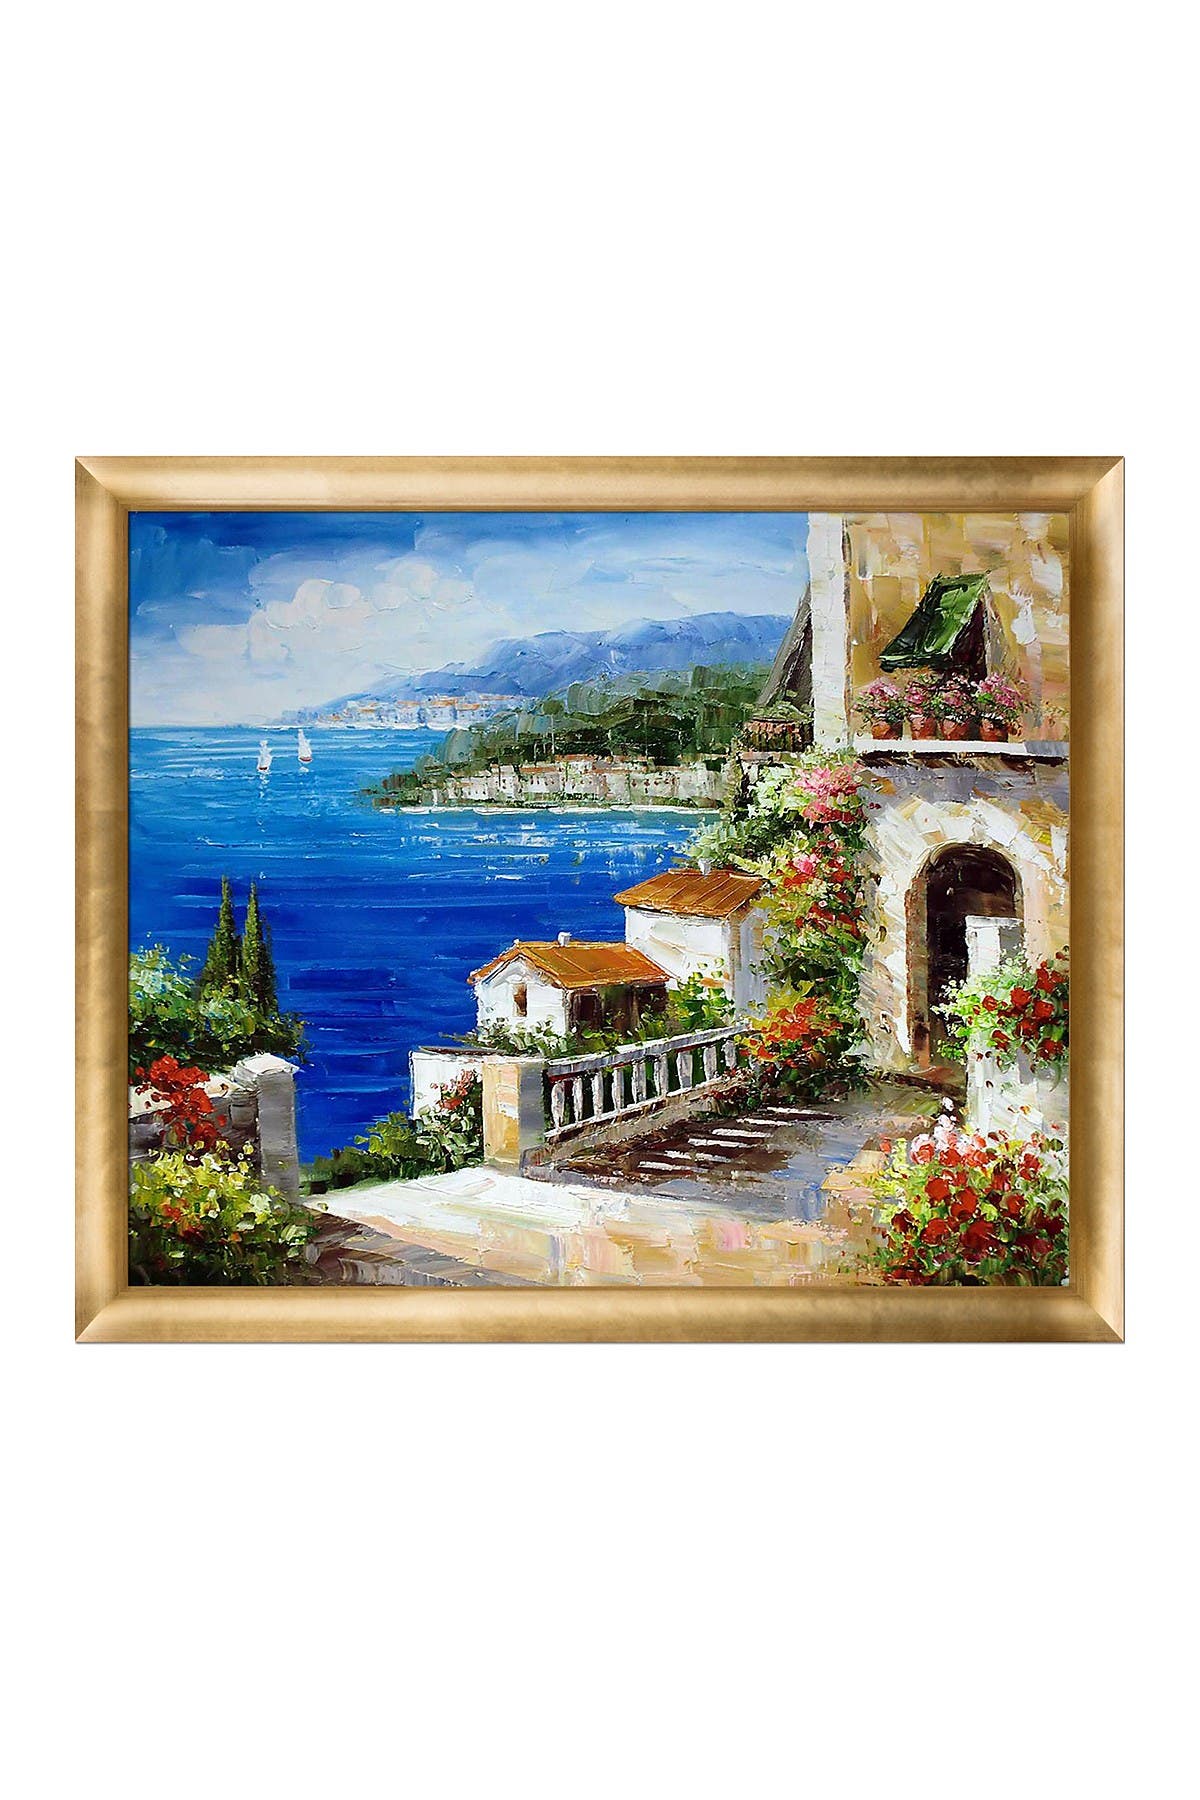 overstockArt Vacation Harbor by Unknown Artists Framed Hand Painted Oil on Canvas 